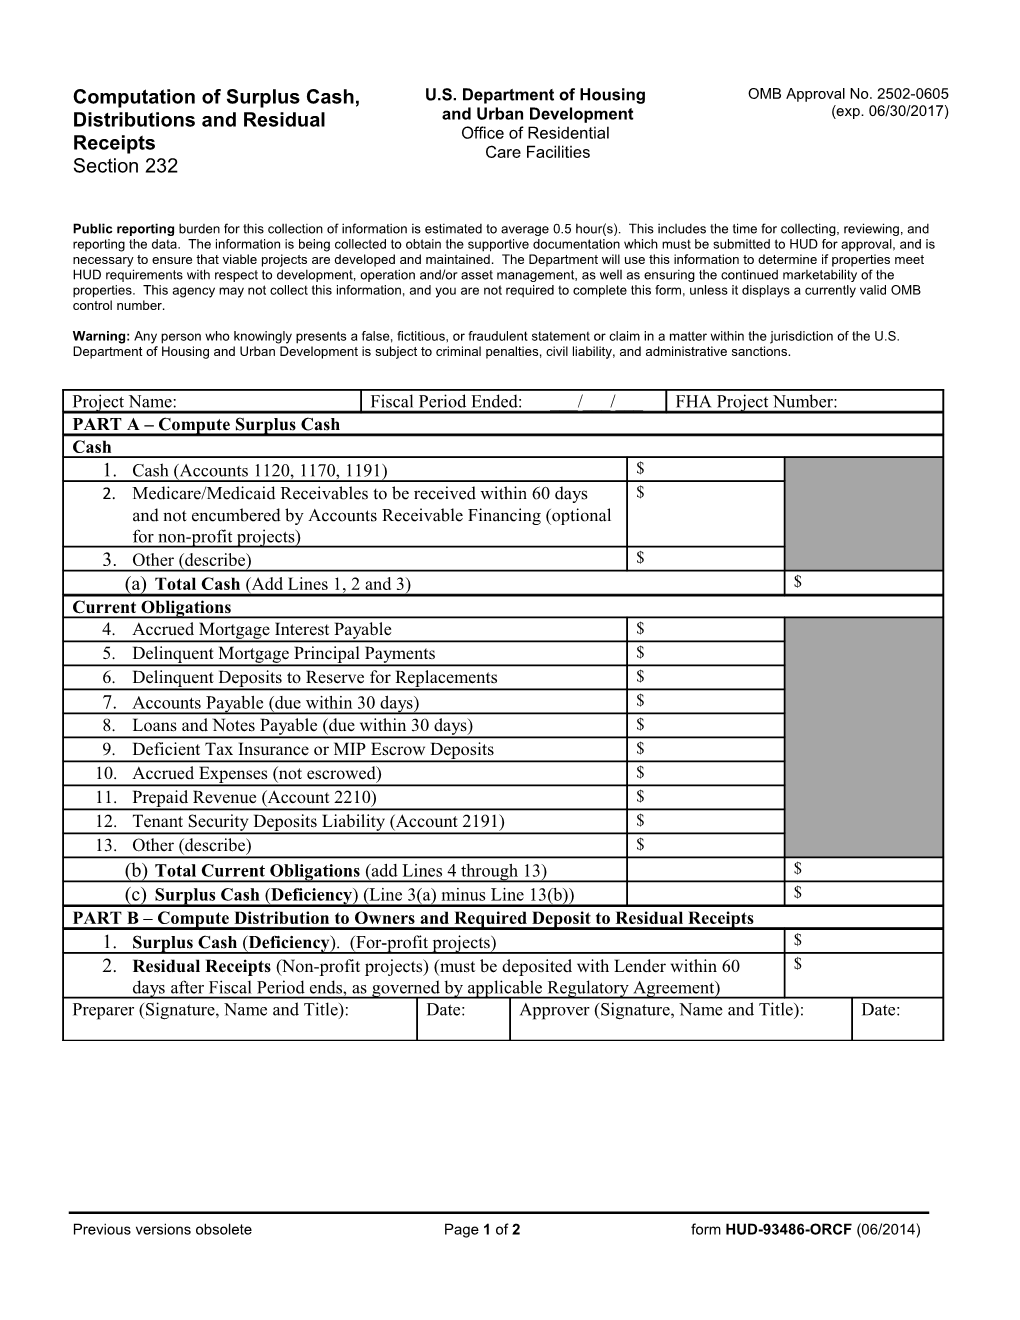 Previous Versions Obsolete Page 1 of 2 Form HUD-93486-ORCF (06/2014)